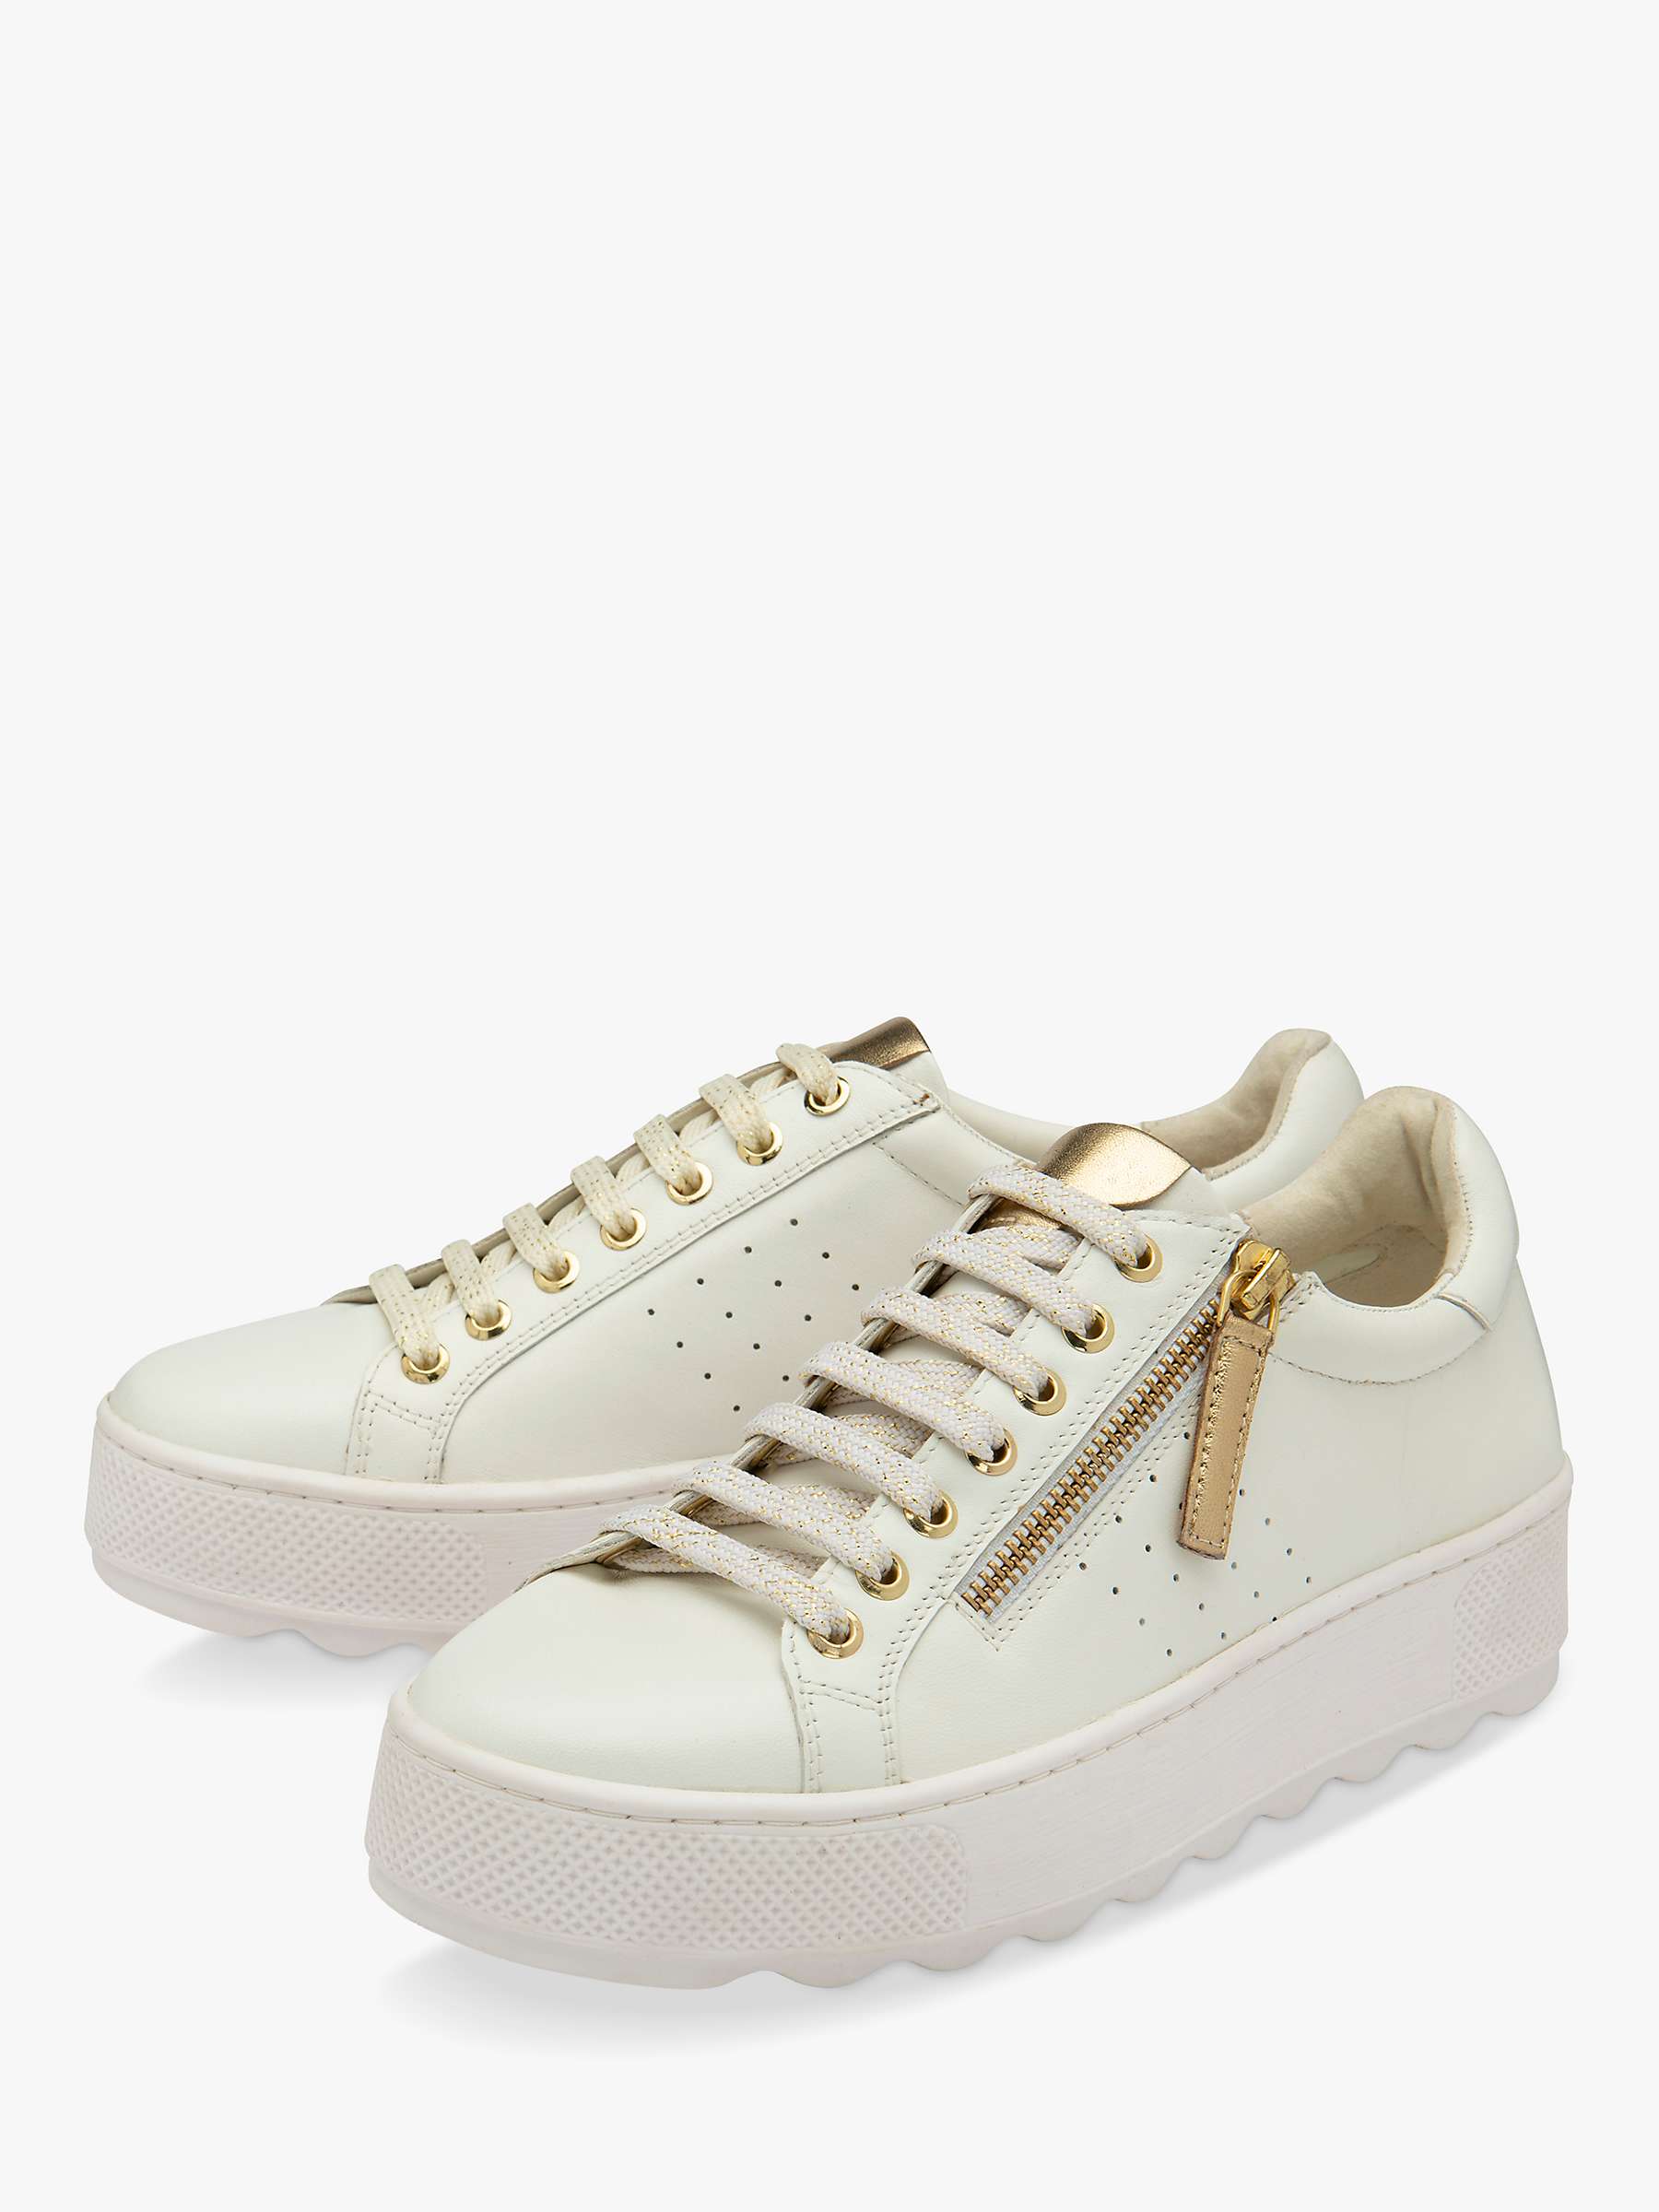 Buy Ravel Calton Leather Trainers, White Online at johnlewis.com